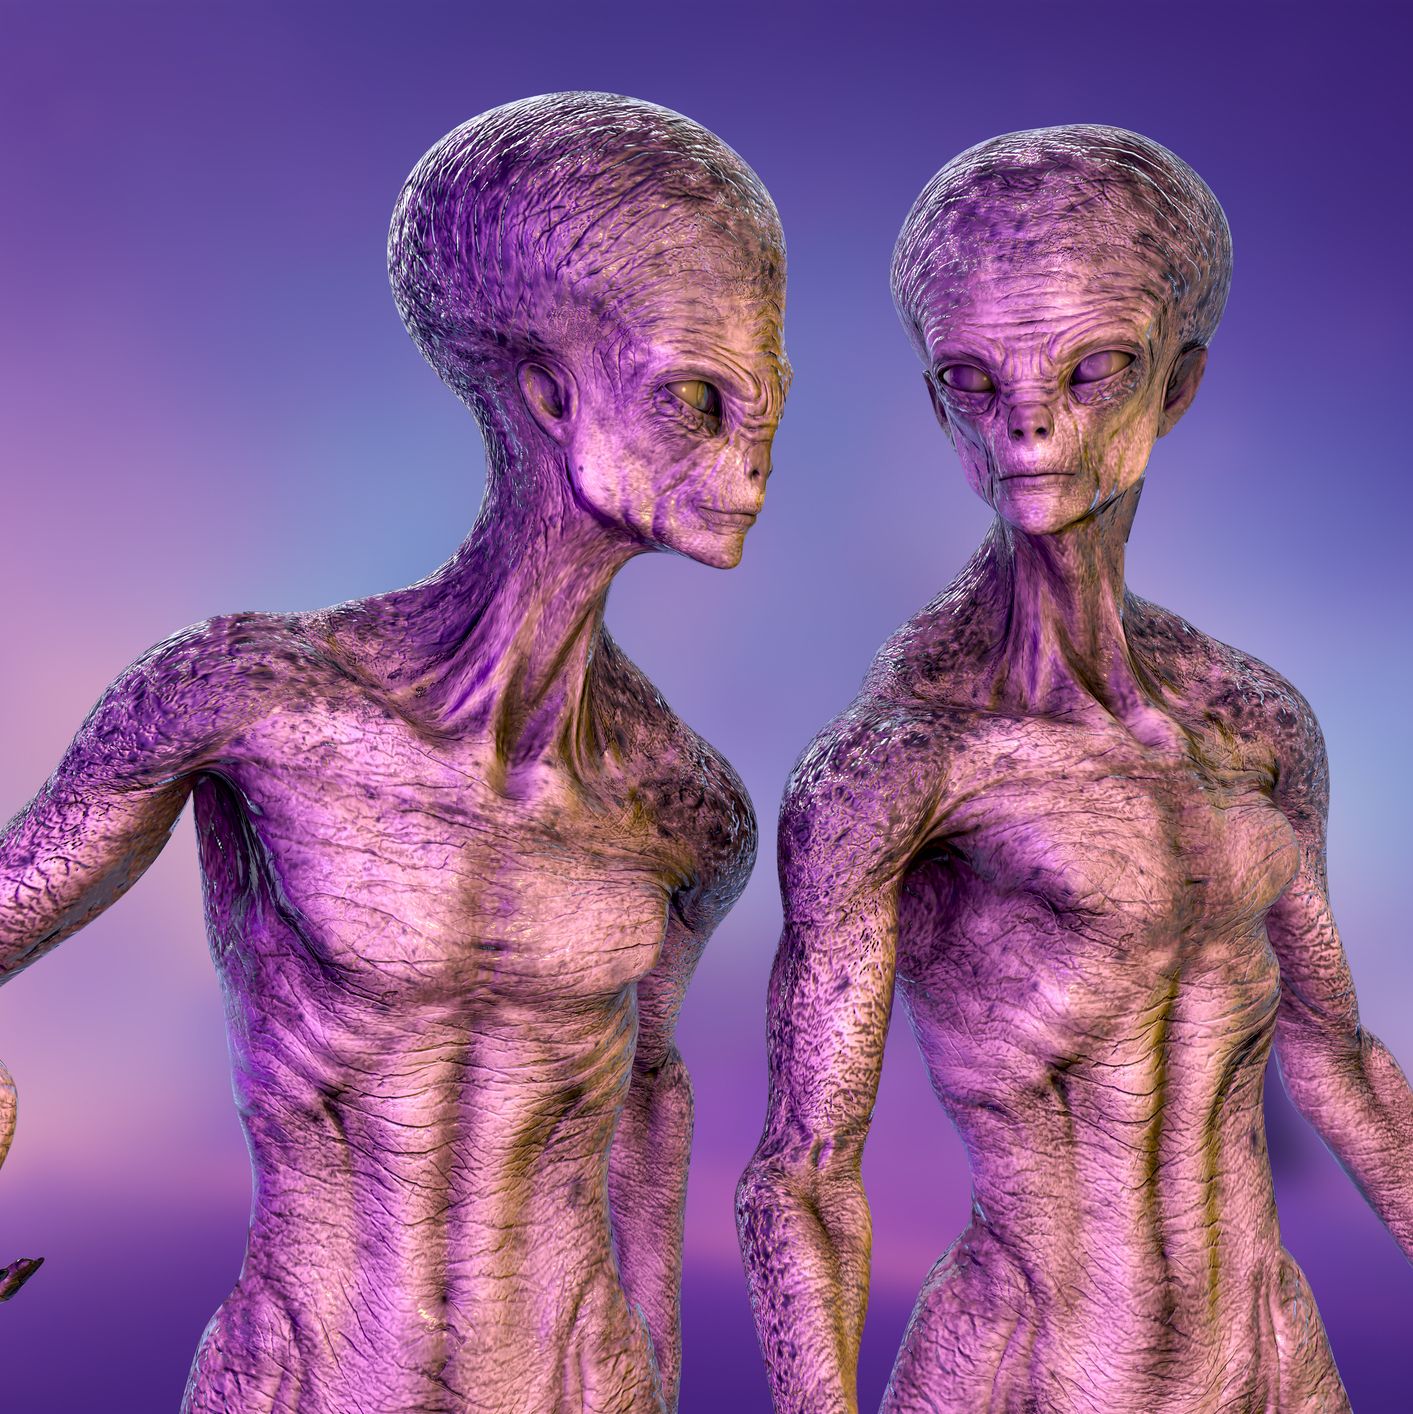 A New Study Suggests Aliens Aren't Little Green Men. They're Purple People Eaters.